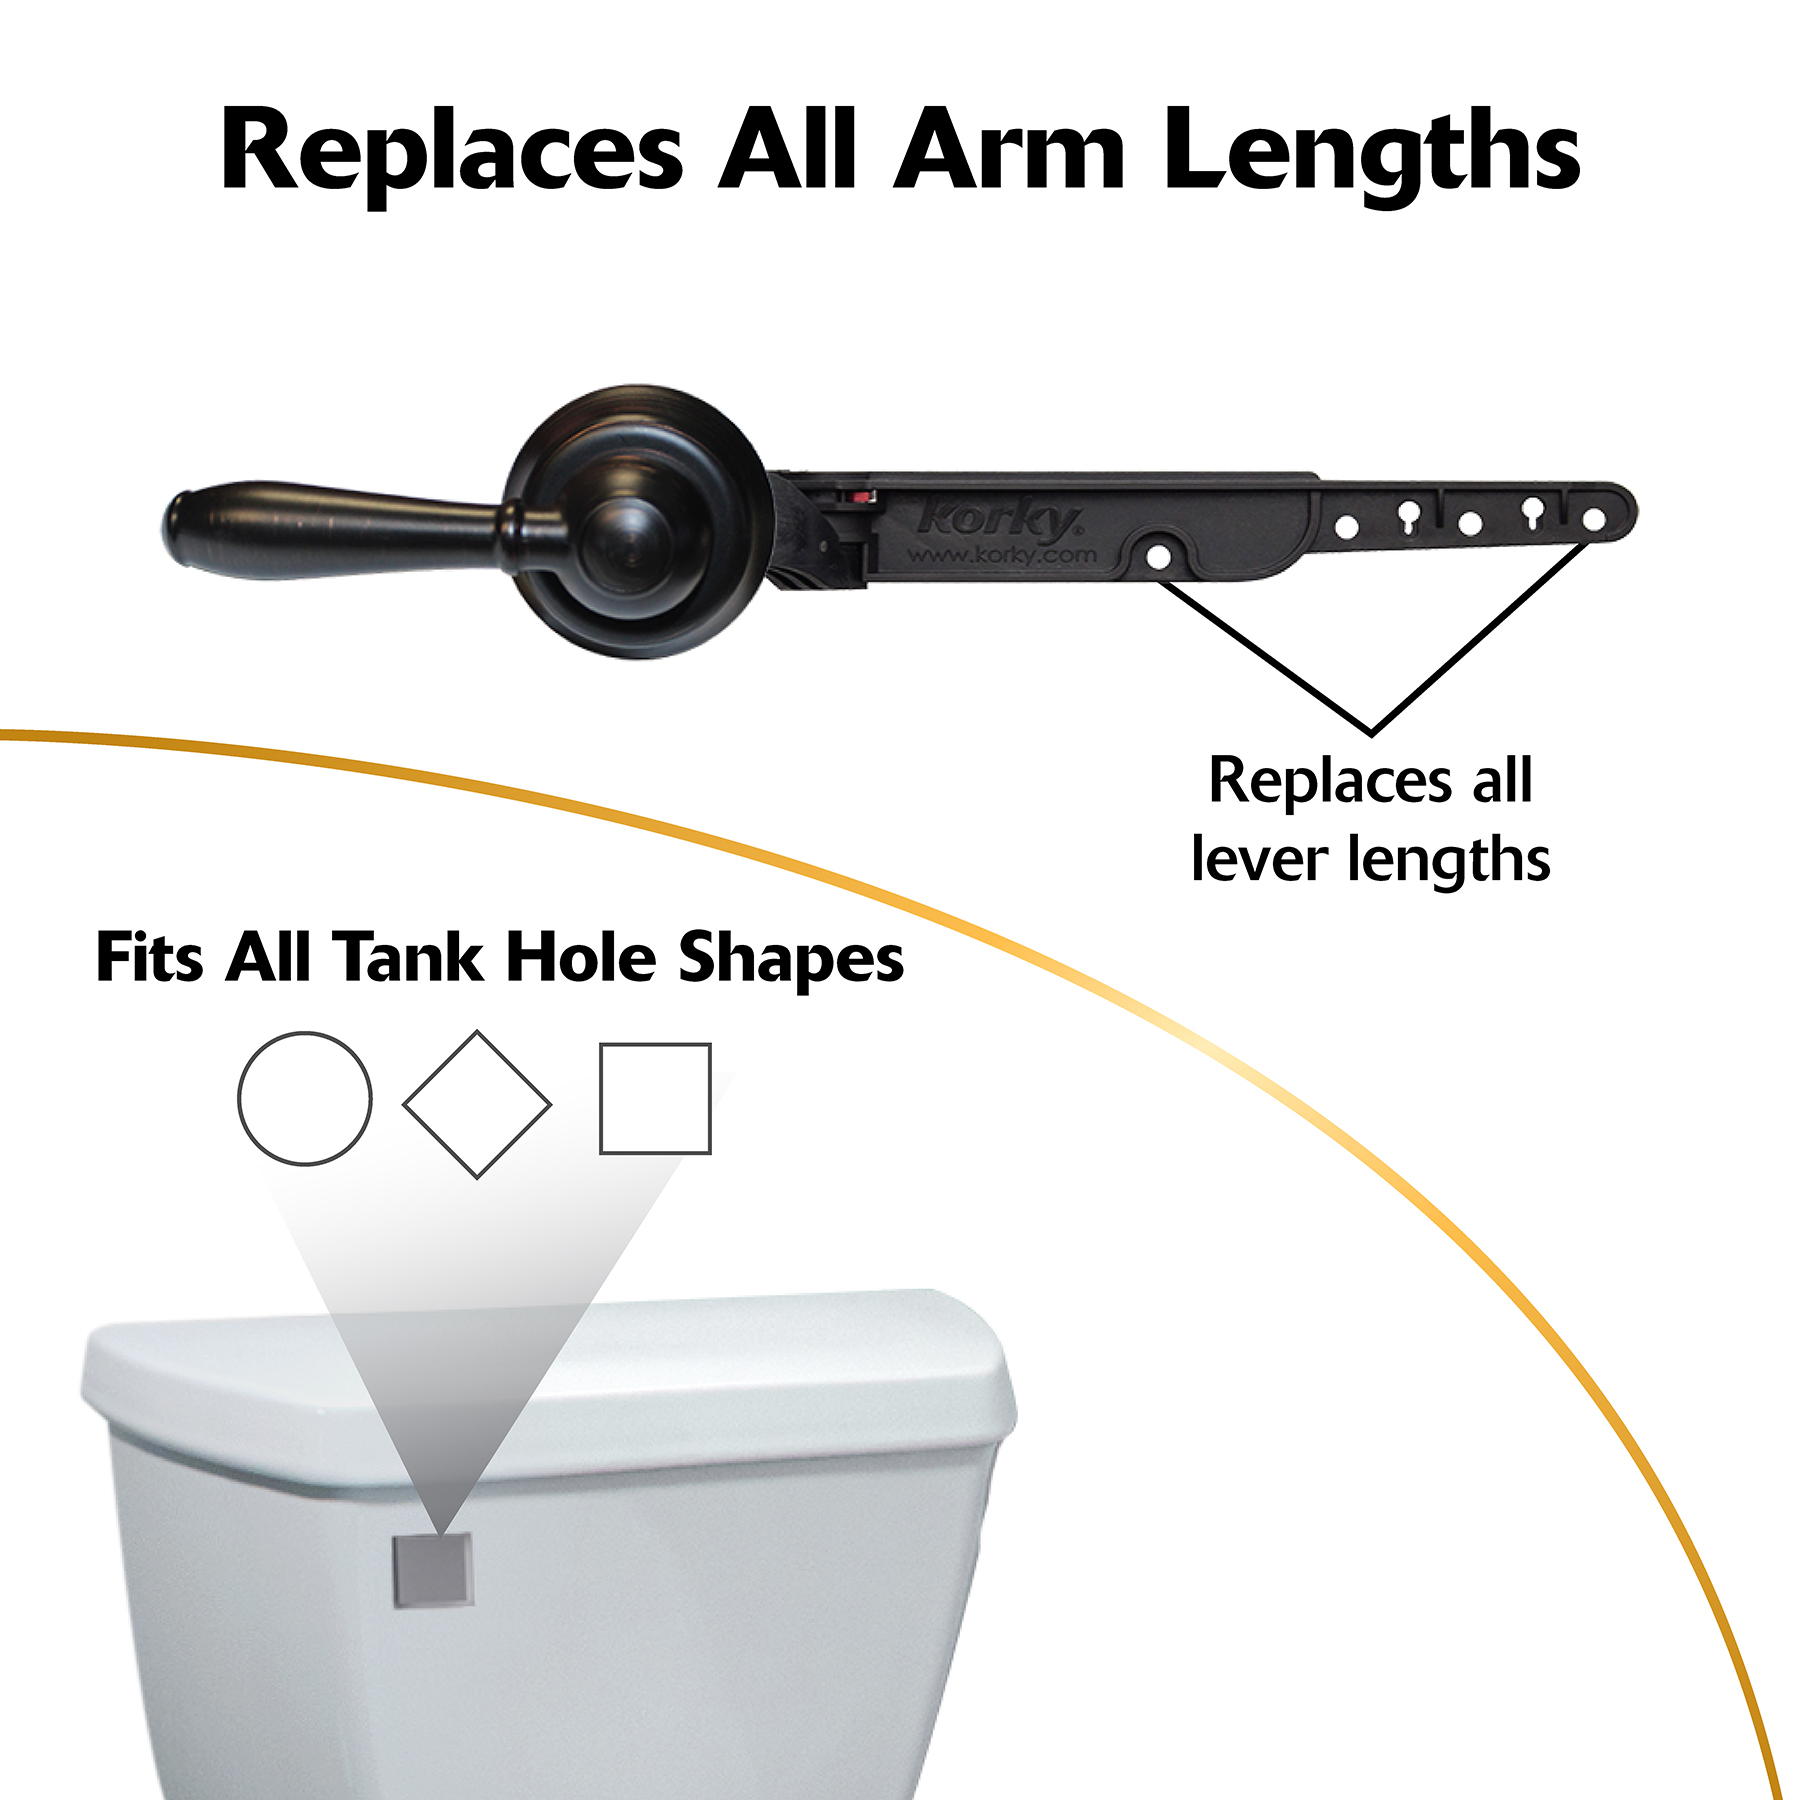 The Korky oil rubbed bronze toilet handle replaces all arm lengths and fits all toilet tank hole shapes